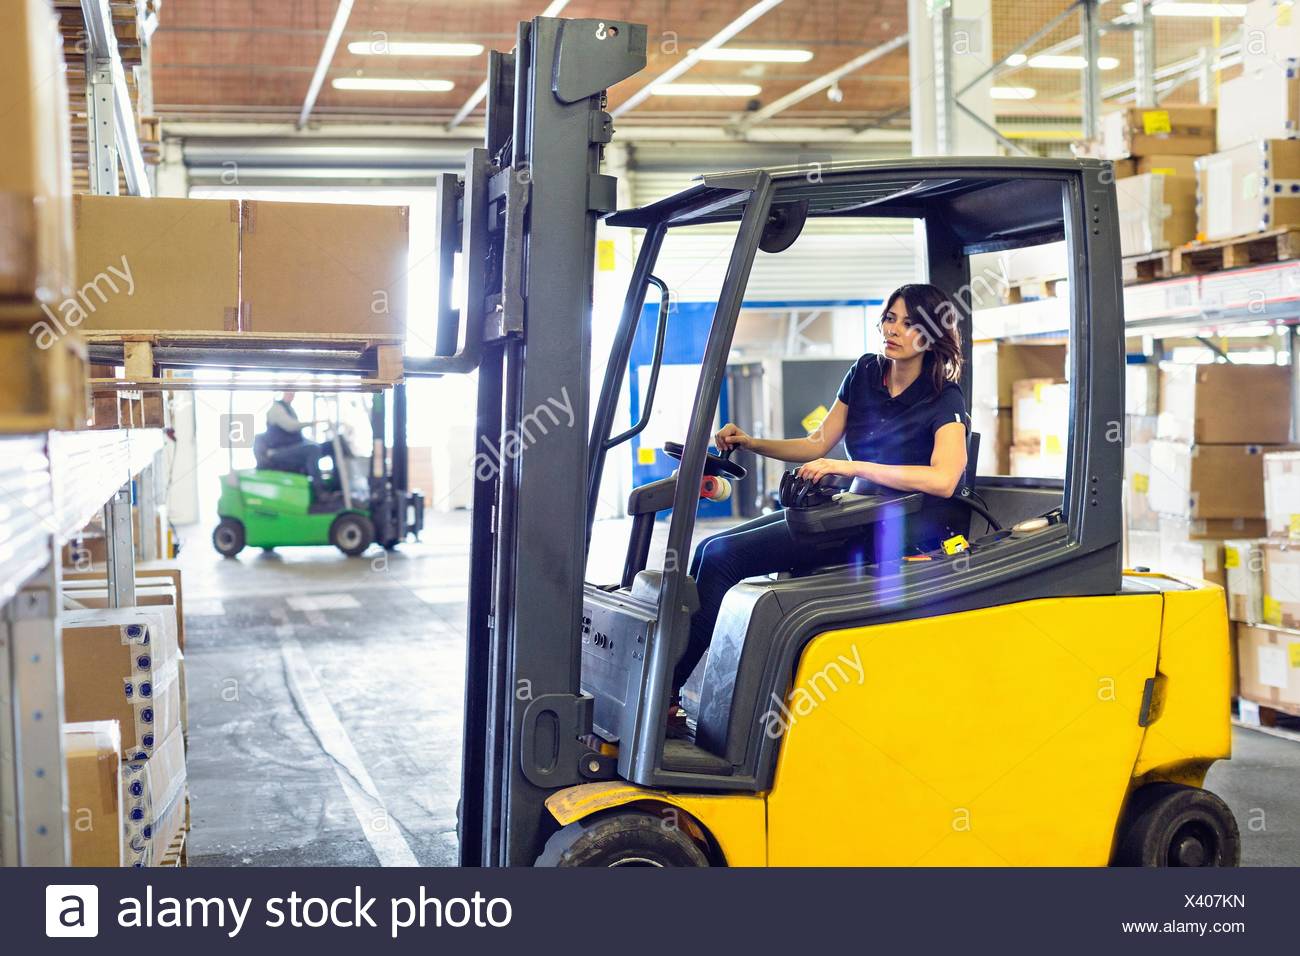 Female Forklift Truck Driver Working In Distribution Warehouse Stock Photo Alamy